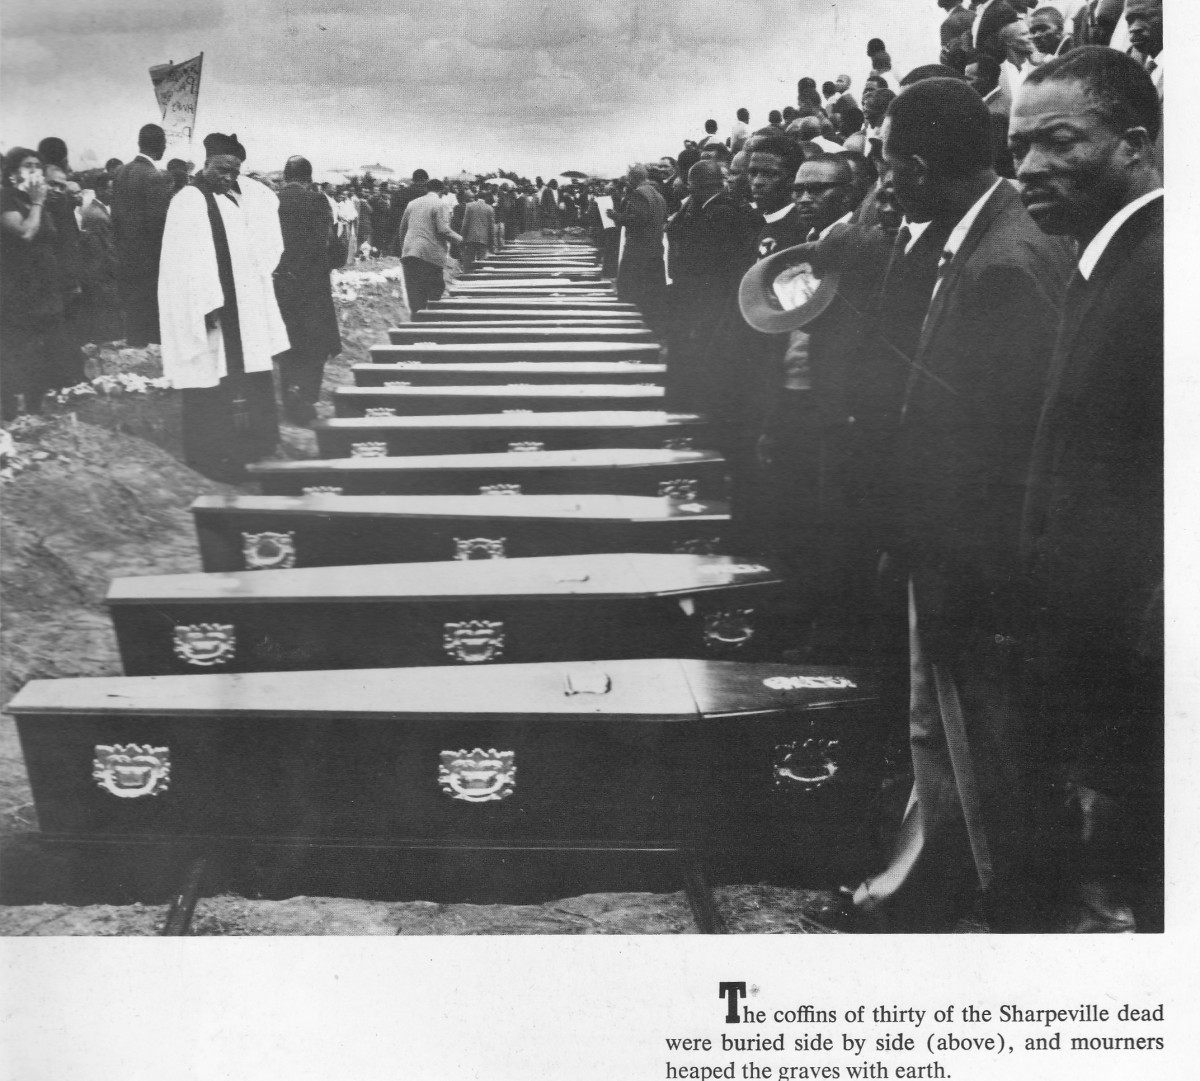 Burial of the Sharpeville shooting victims, most of whom were shot in the back when running away from the rampaging police